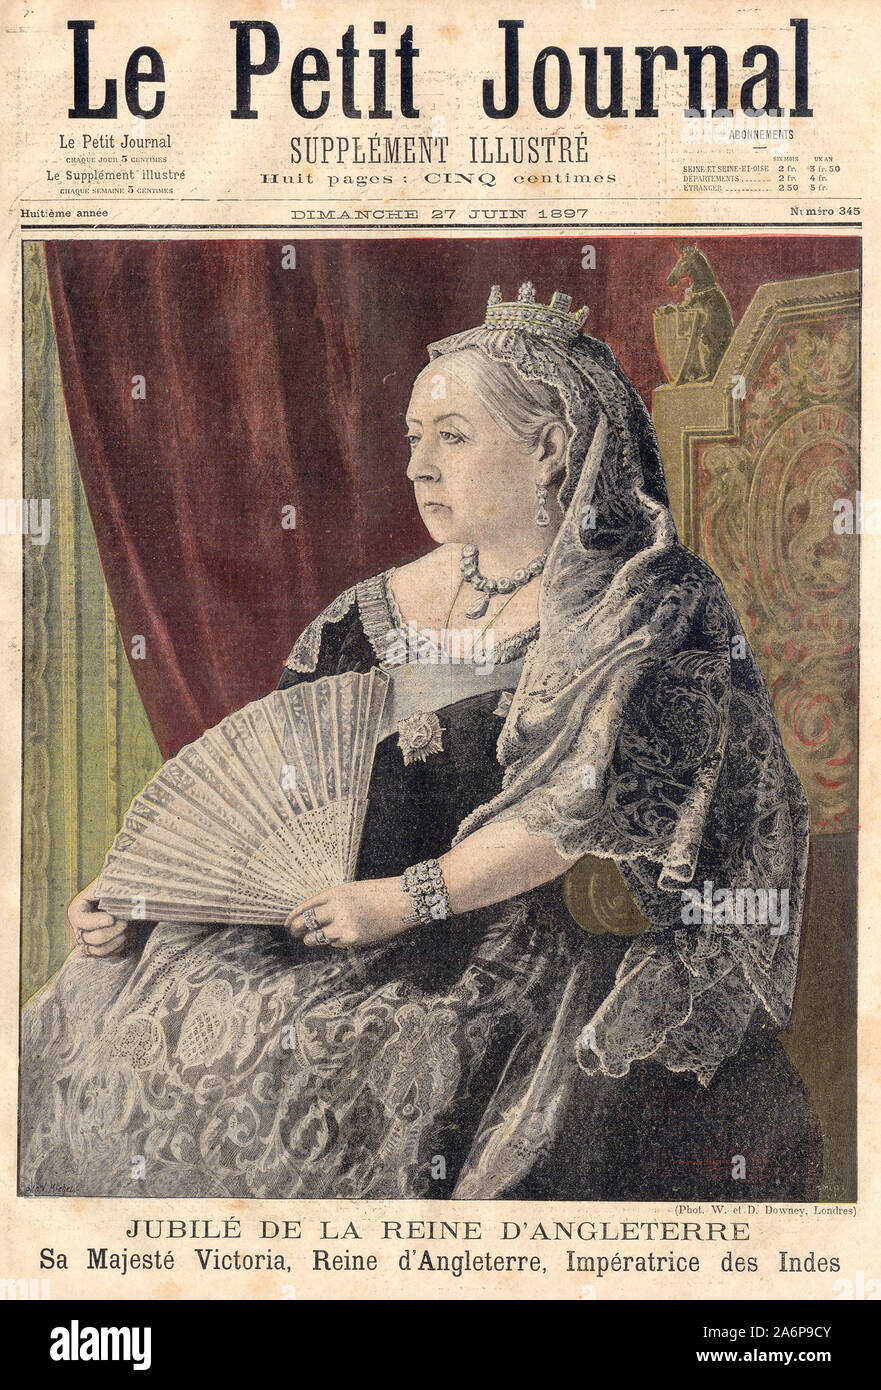 JUBILÉ DE LA REINE D'ANGLETERRE Majesté Victoria, Reine d'Angleterre, Impératrice des Indes - JUBILEE OF THE QUEEN OF ENGLAND Majesty Victoria, Queen of England, Empress of India - In 'Le Petit Journal' French illustrated newspaper - 1897 Stock Photo